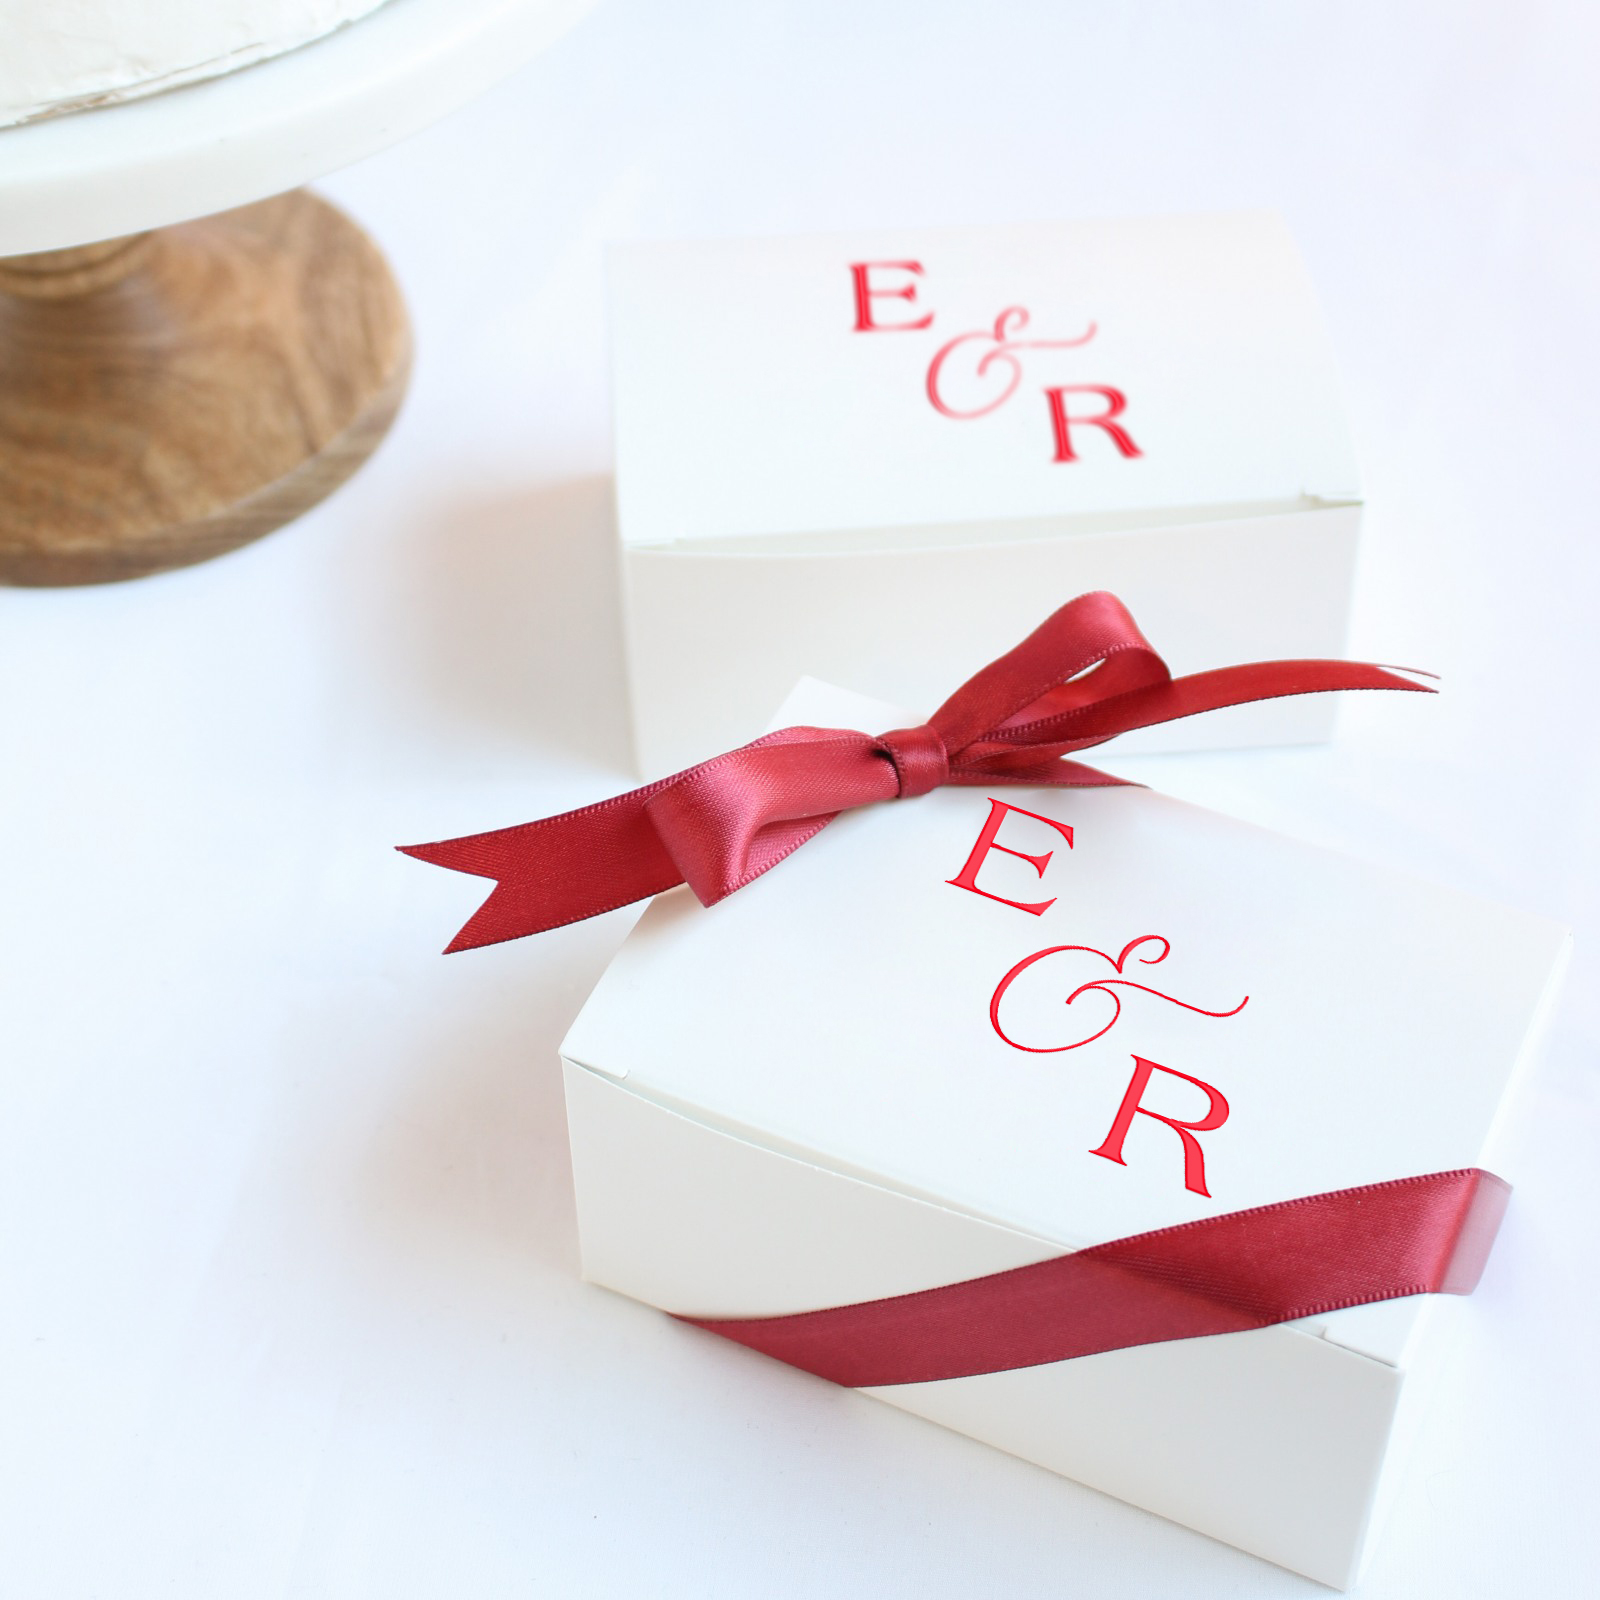 25 PERSONALISED Wedding Cake Slice £18.74 inc Favour Boxes 100x60x30mm del.